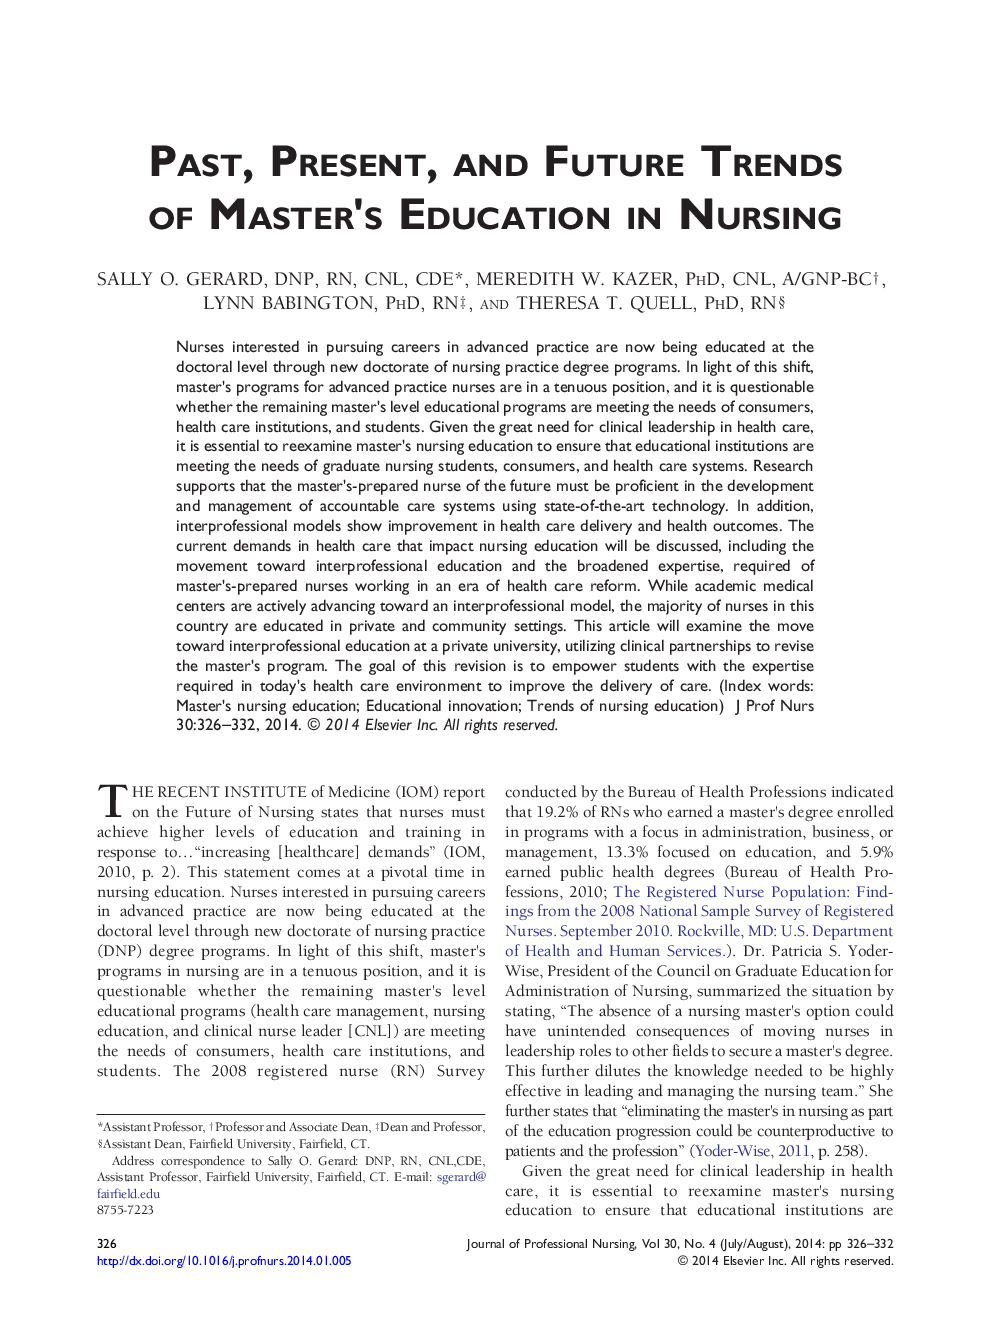 Past, Present, and Future Trends of Master's Education in Nursing